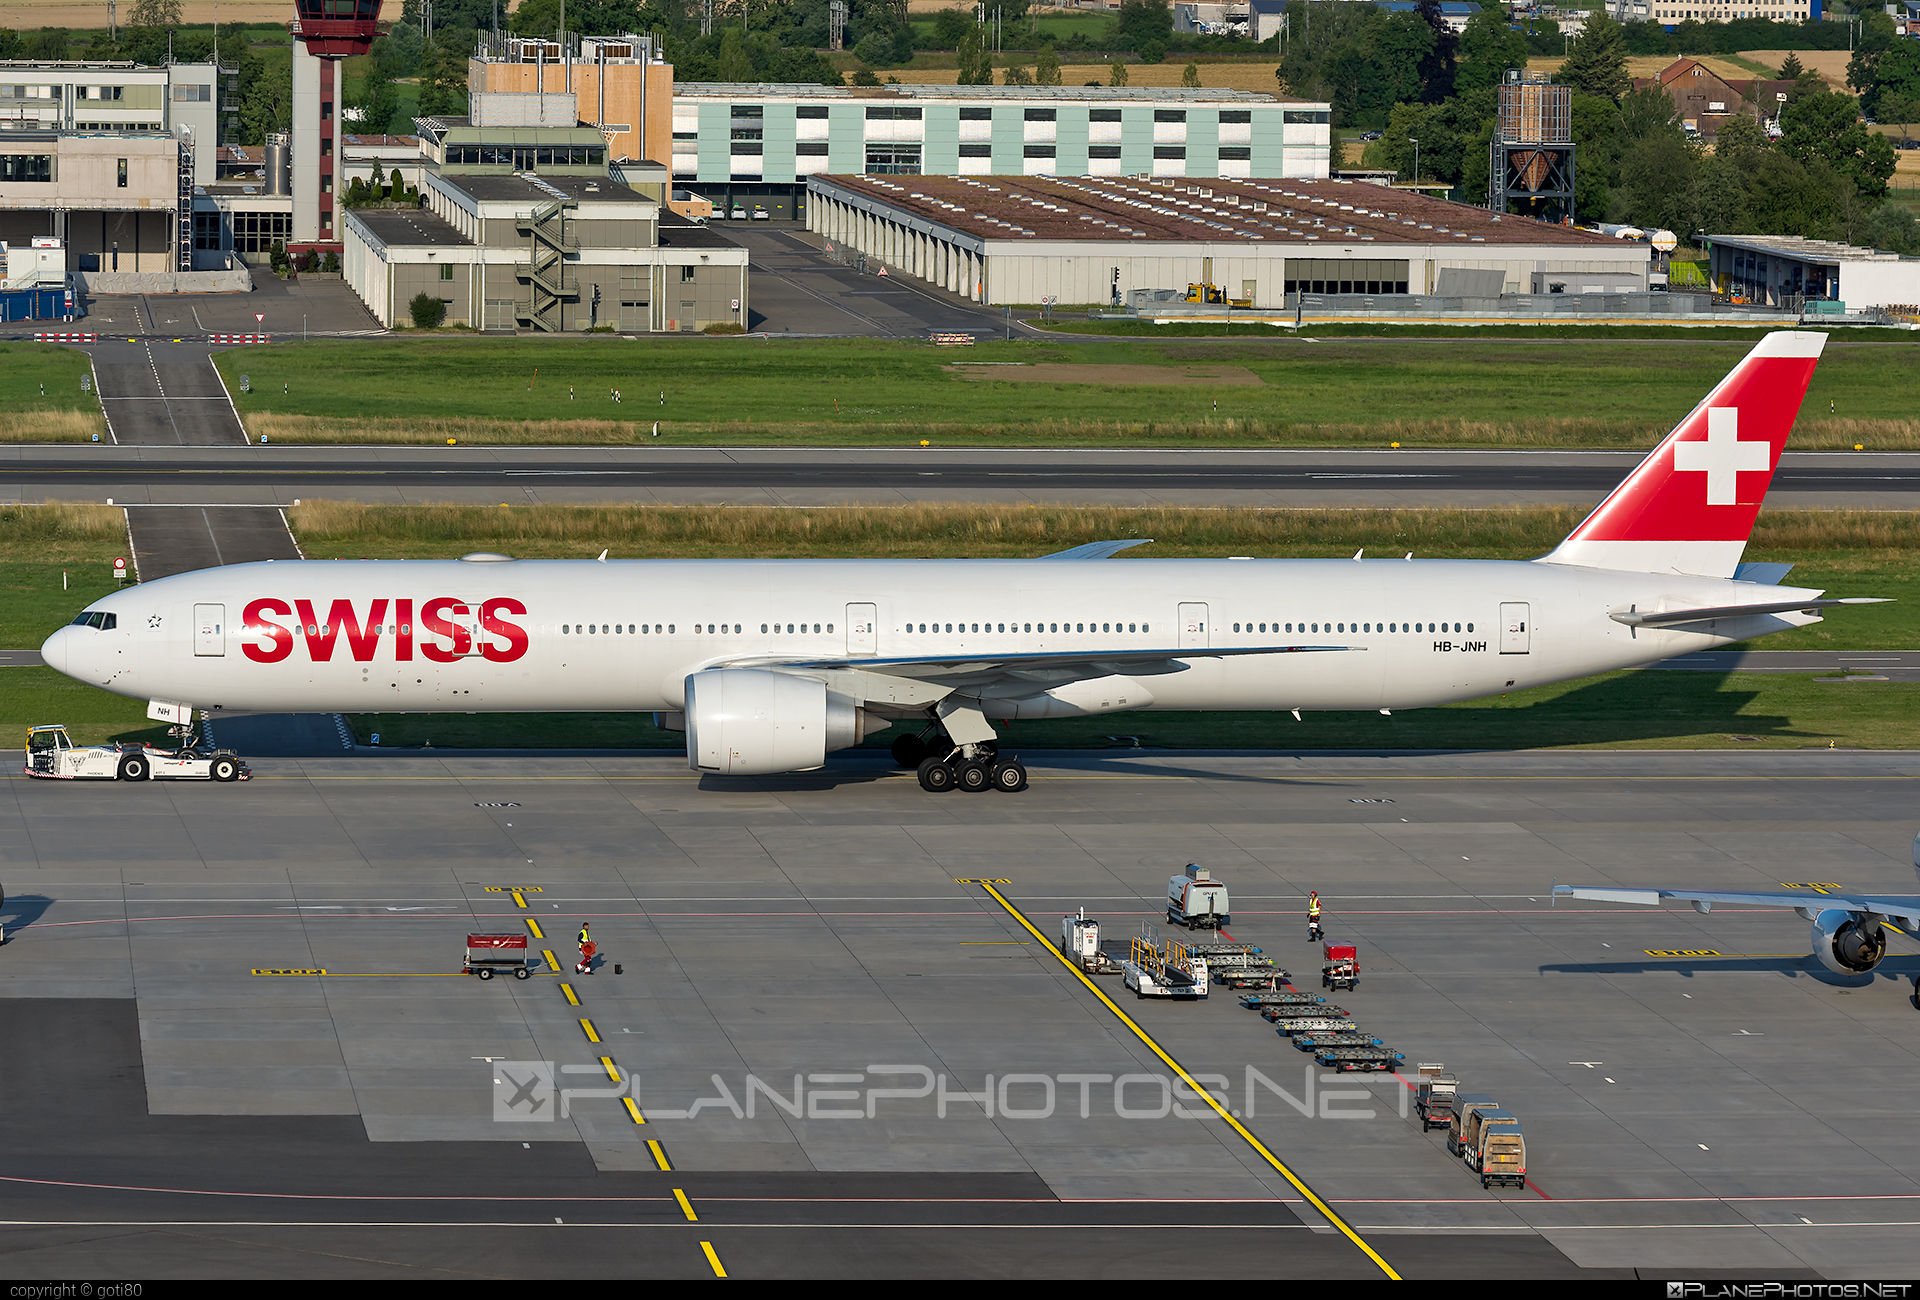 Boeing 777-300ER - HB-JNH operated by Swiss International Air Lines #b777 #b777er #boeing #boeing777 #swiss #swissairlines #tripleseven